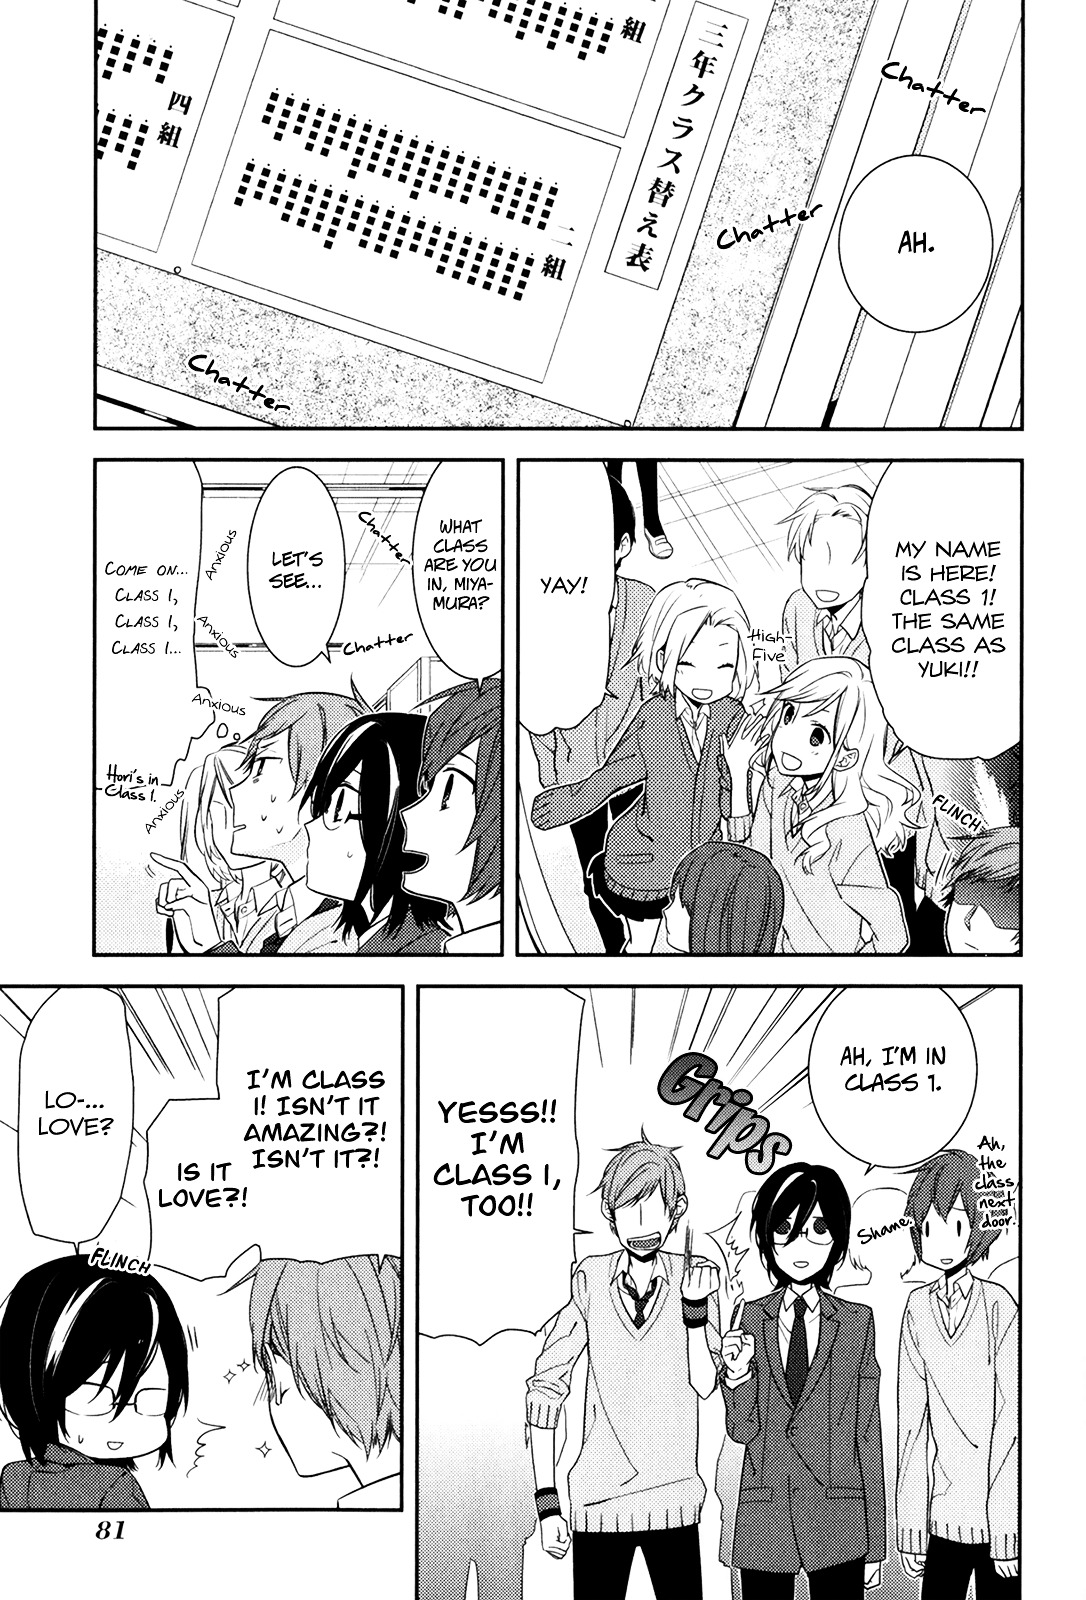 Horimiya Chapter 10 : Page 10 - Picture 2